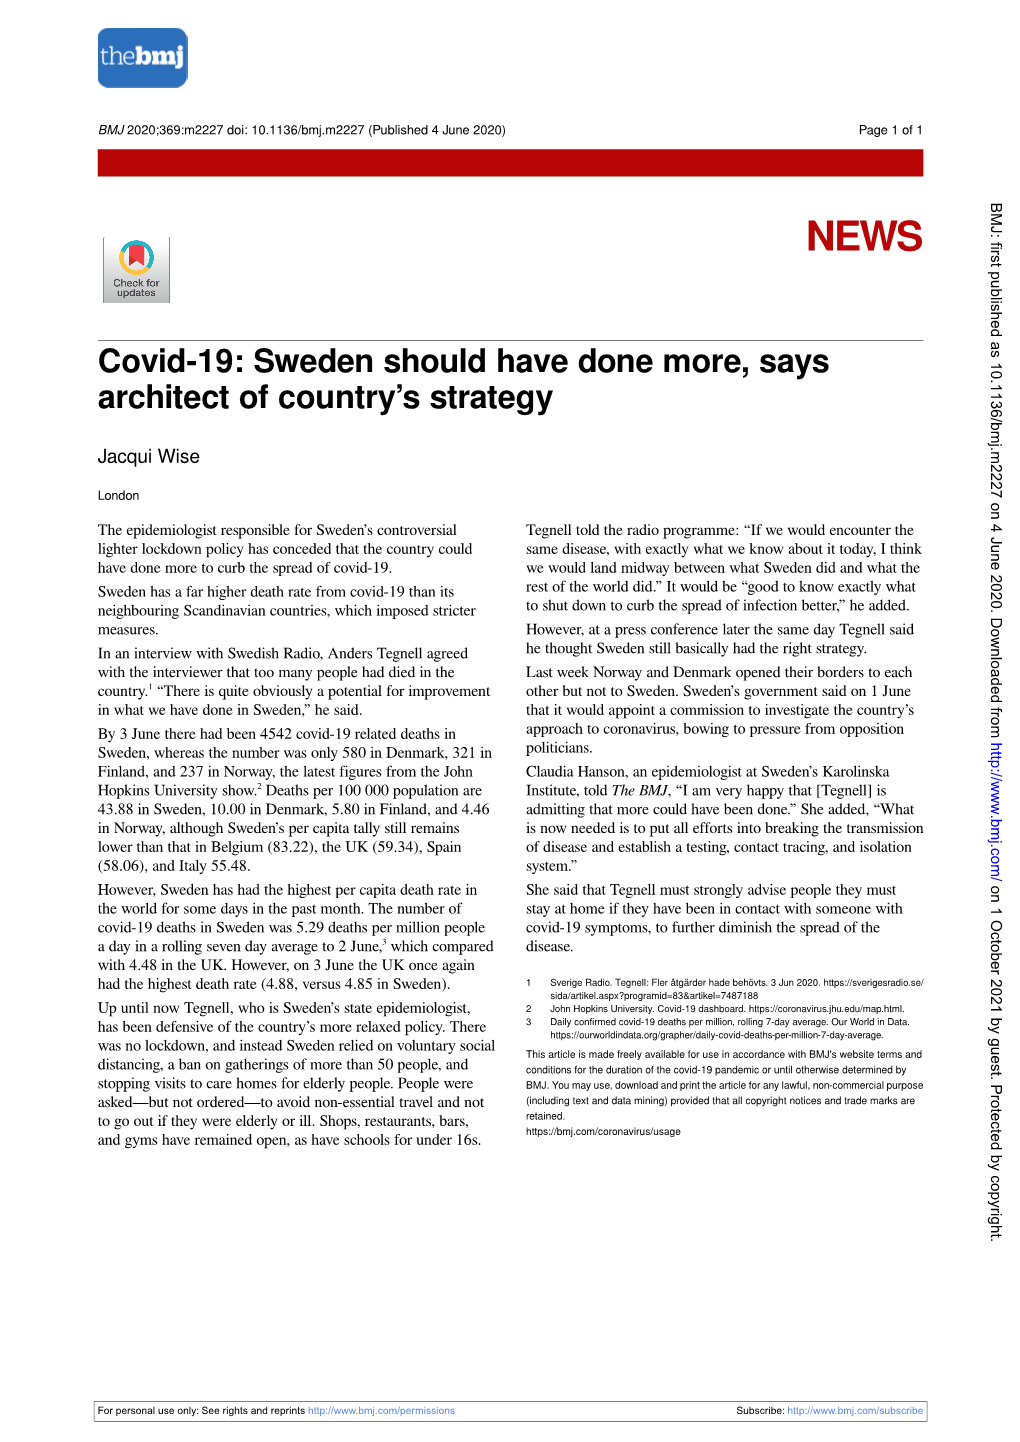 Covid-19: Sweden Should Have Done More, Says Architect of Country’S Strategy